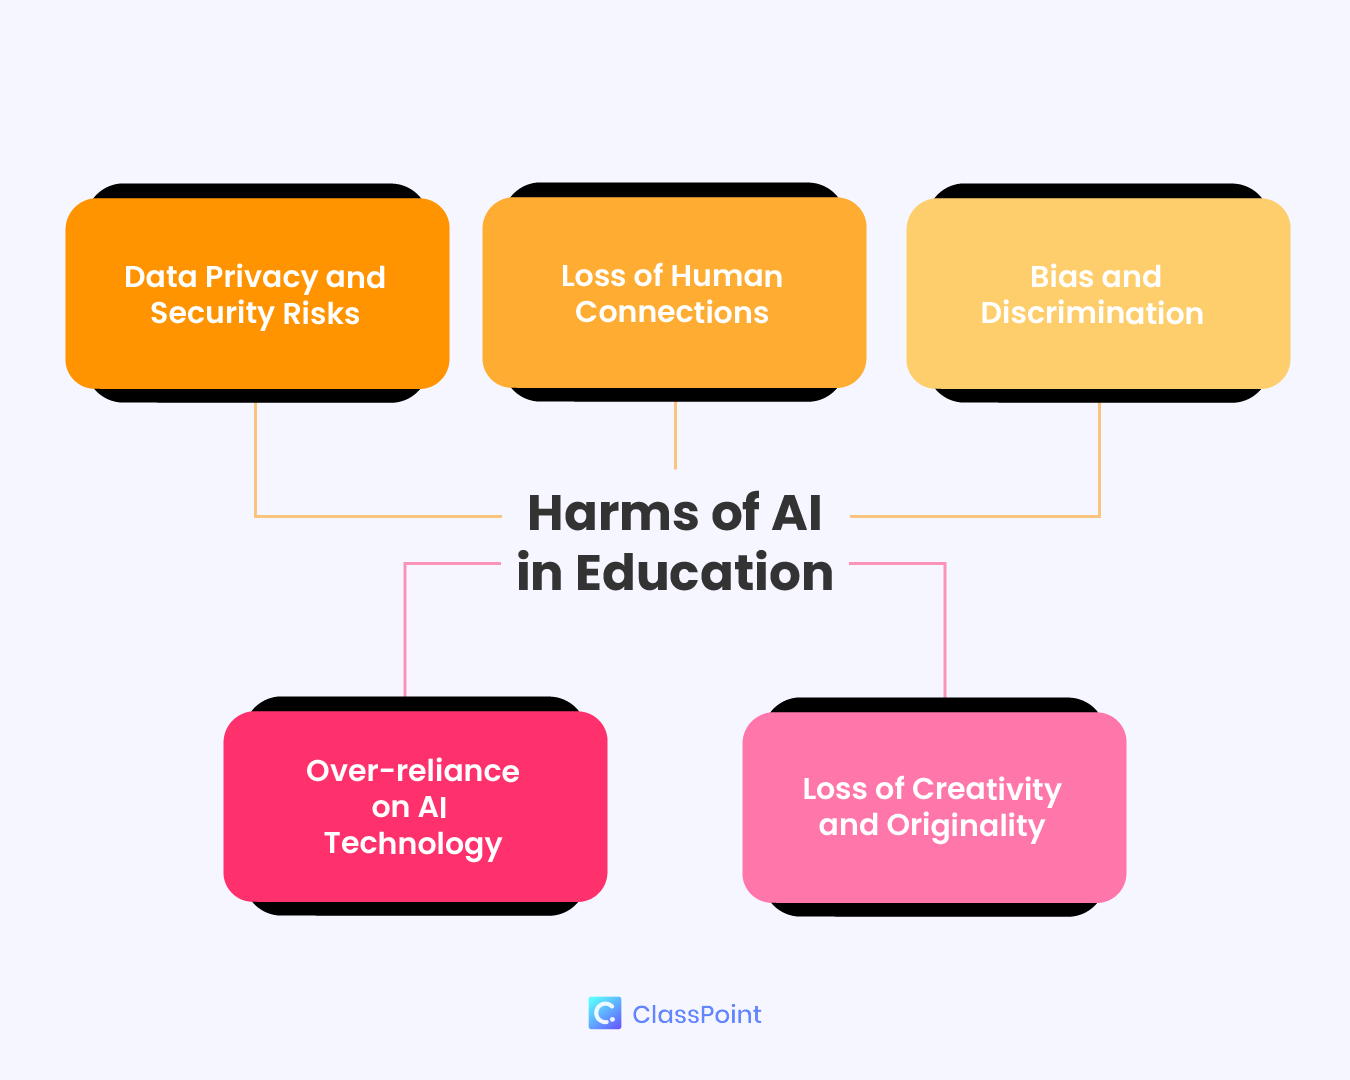 Harms of AI in Education